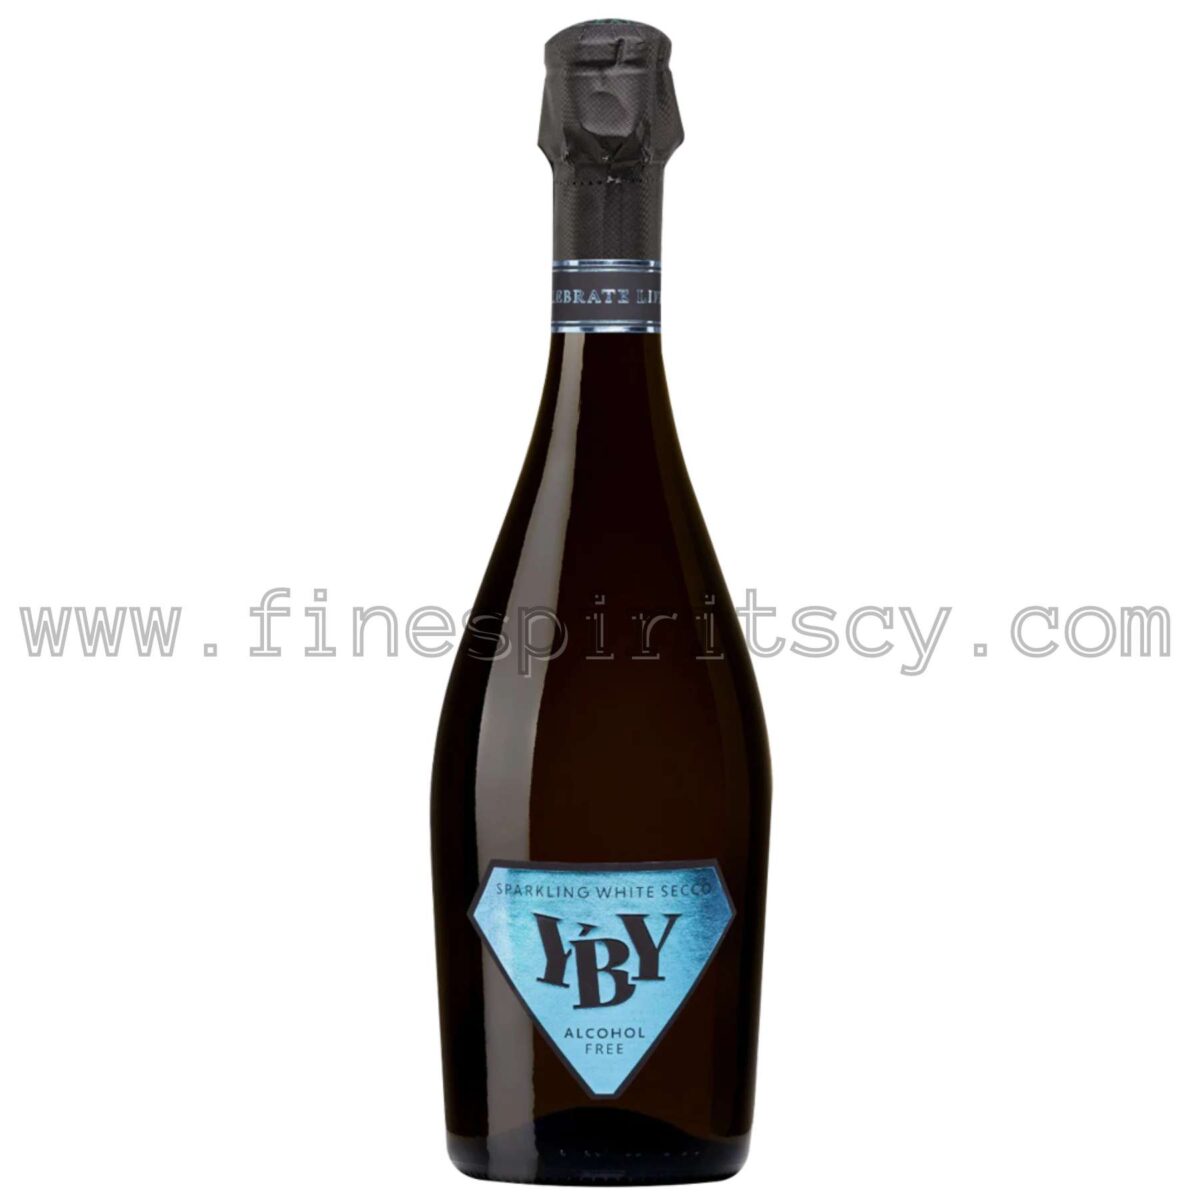 YBY Alcohol Free White Sparkling Secco Wine Cyprus Price Order Online